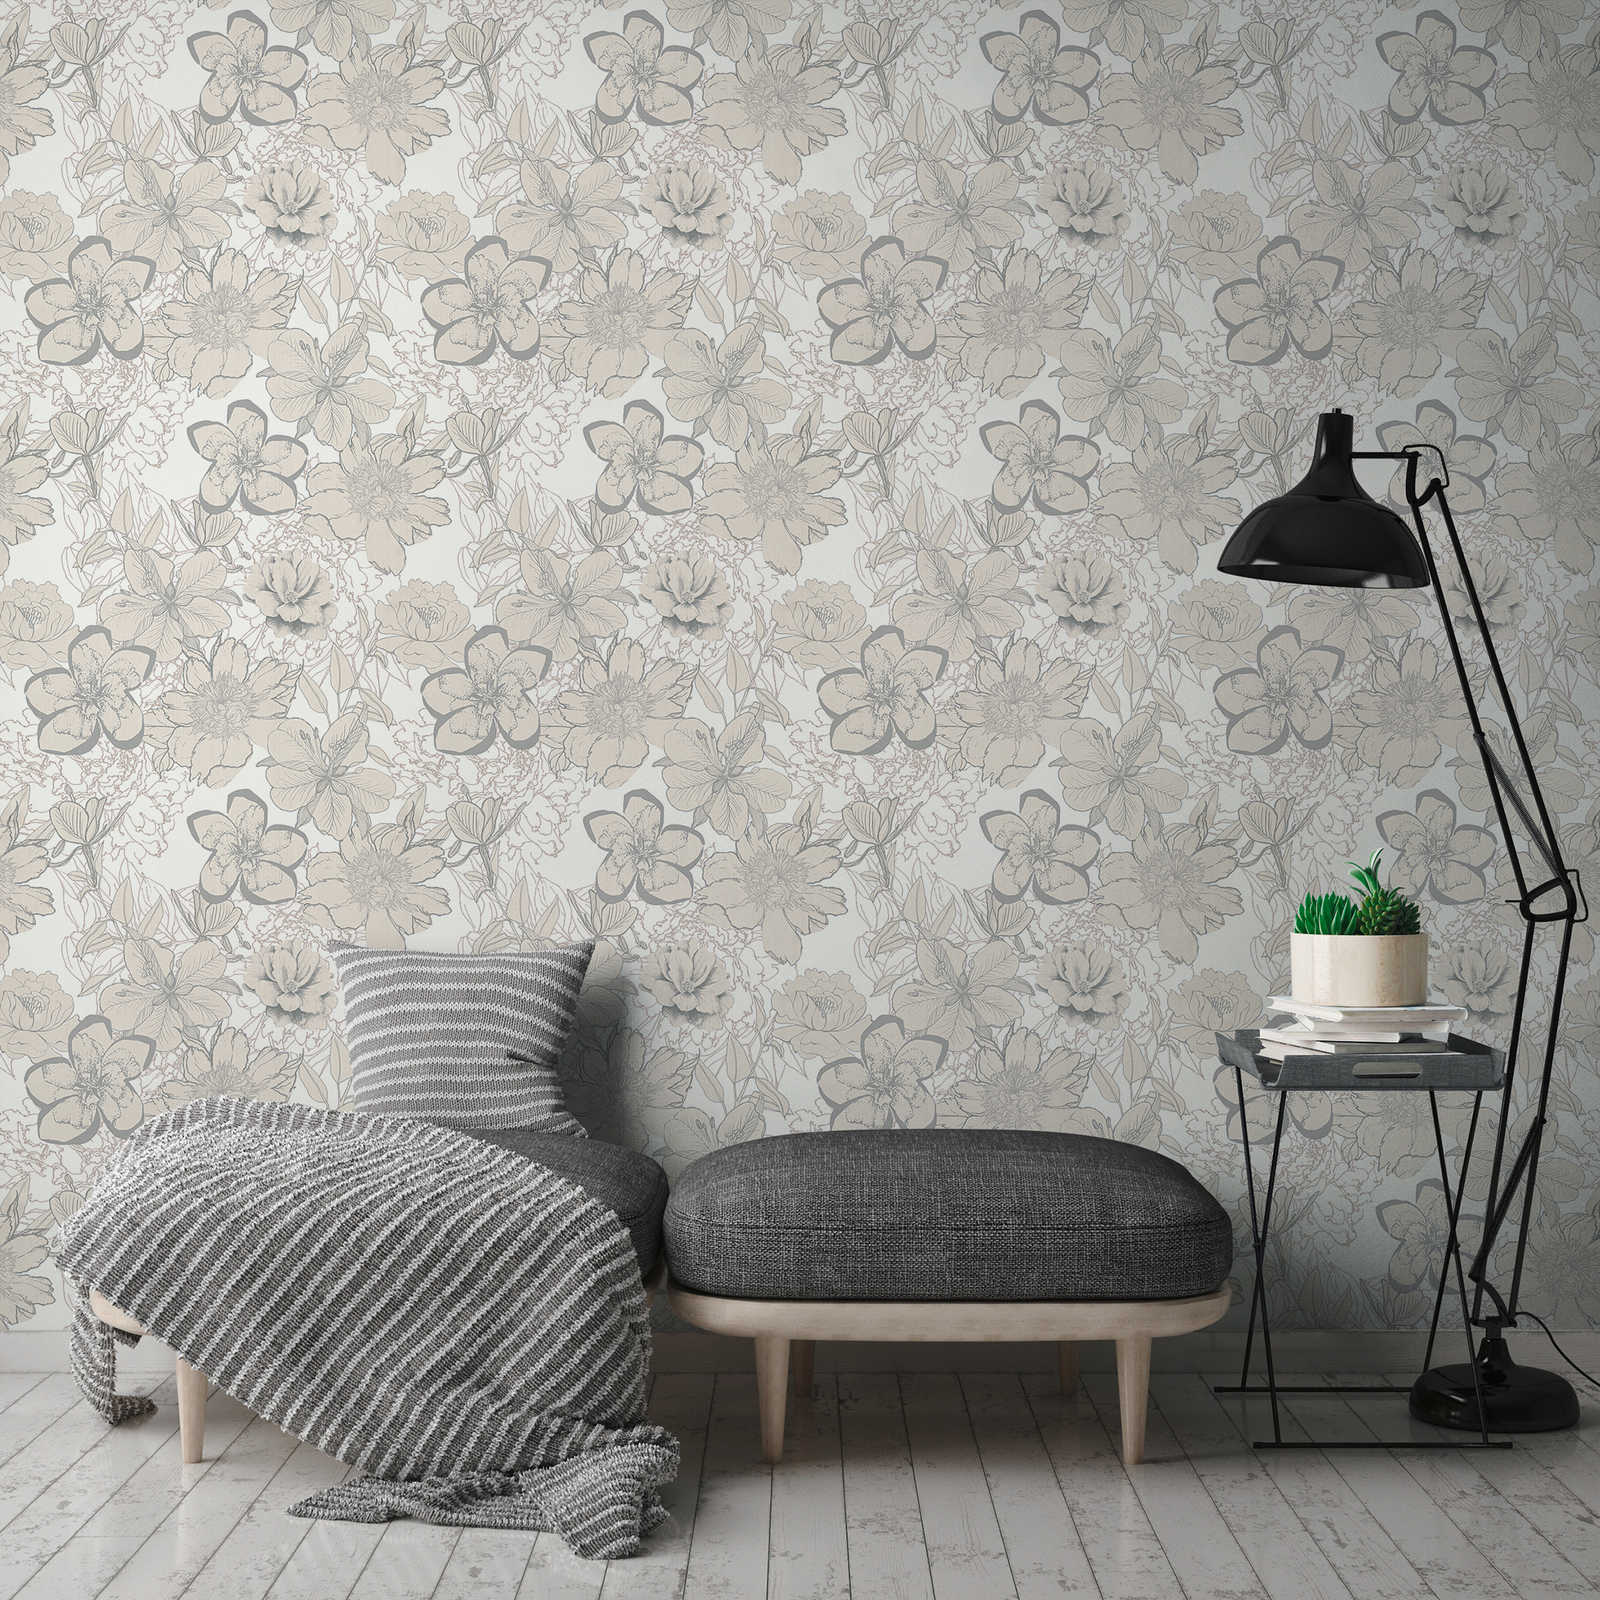             Floral wallpaper with flowers sketches & metallic colour - cream
        